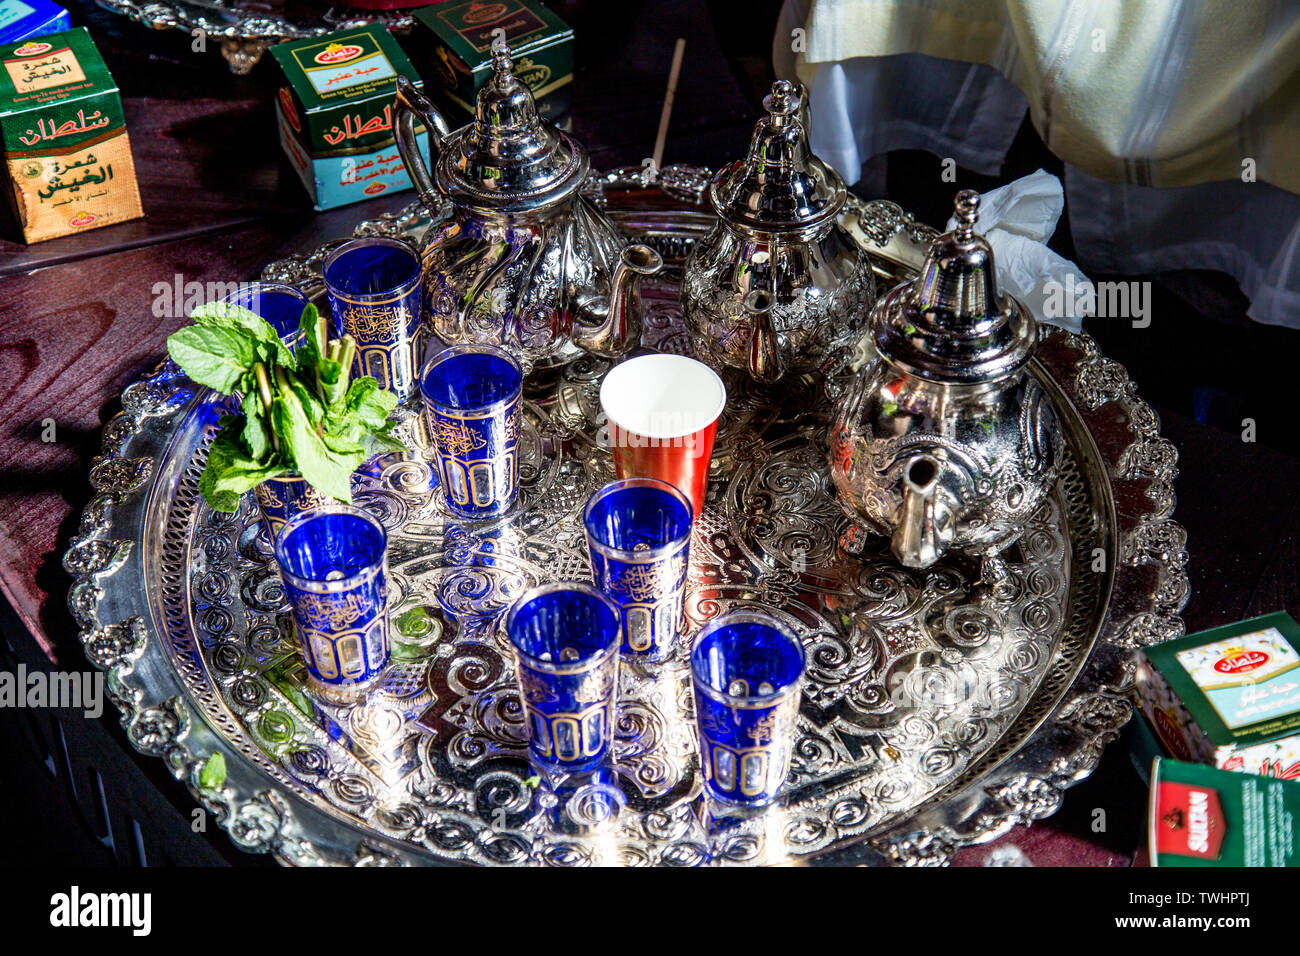 Traditional silverware used for Moroccan mint tea, pots, ornate glasses and tray, FesTeaVal 2019 at Tobacco Dock, London, UK Stock Photo